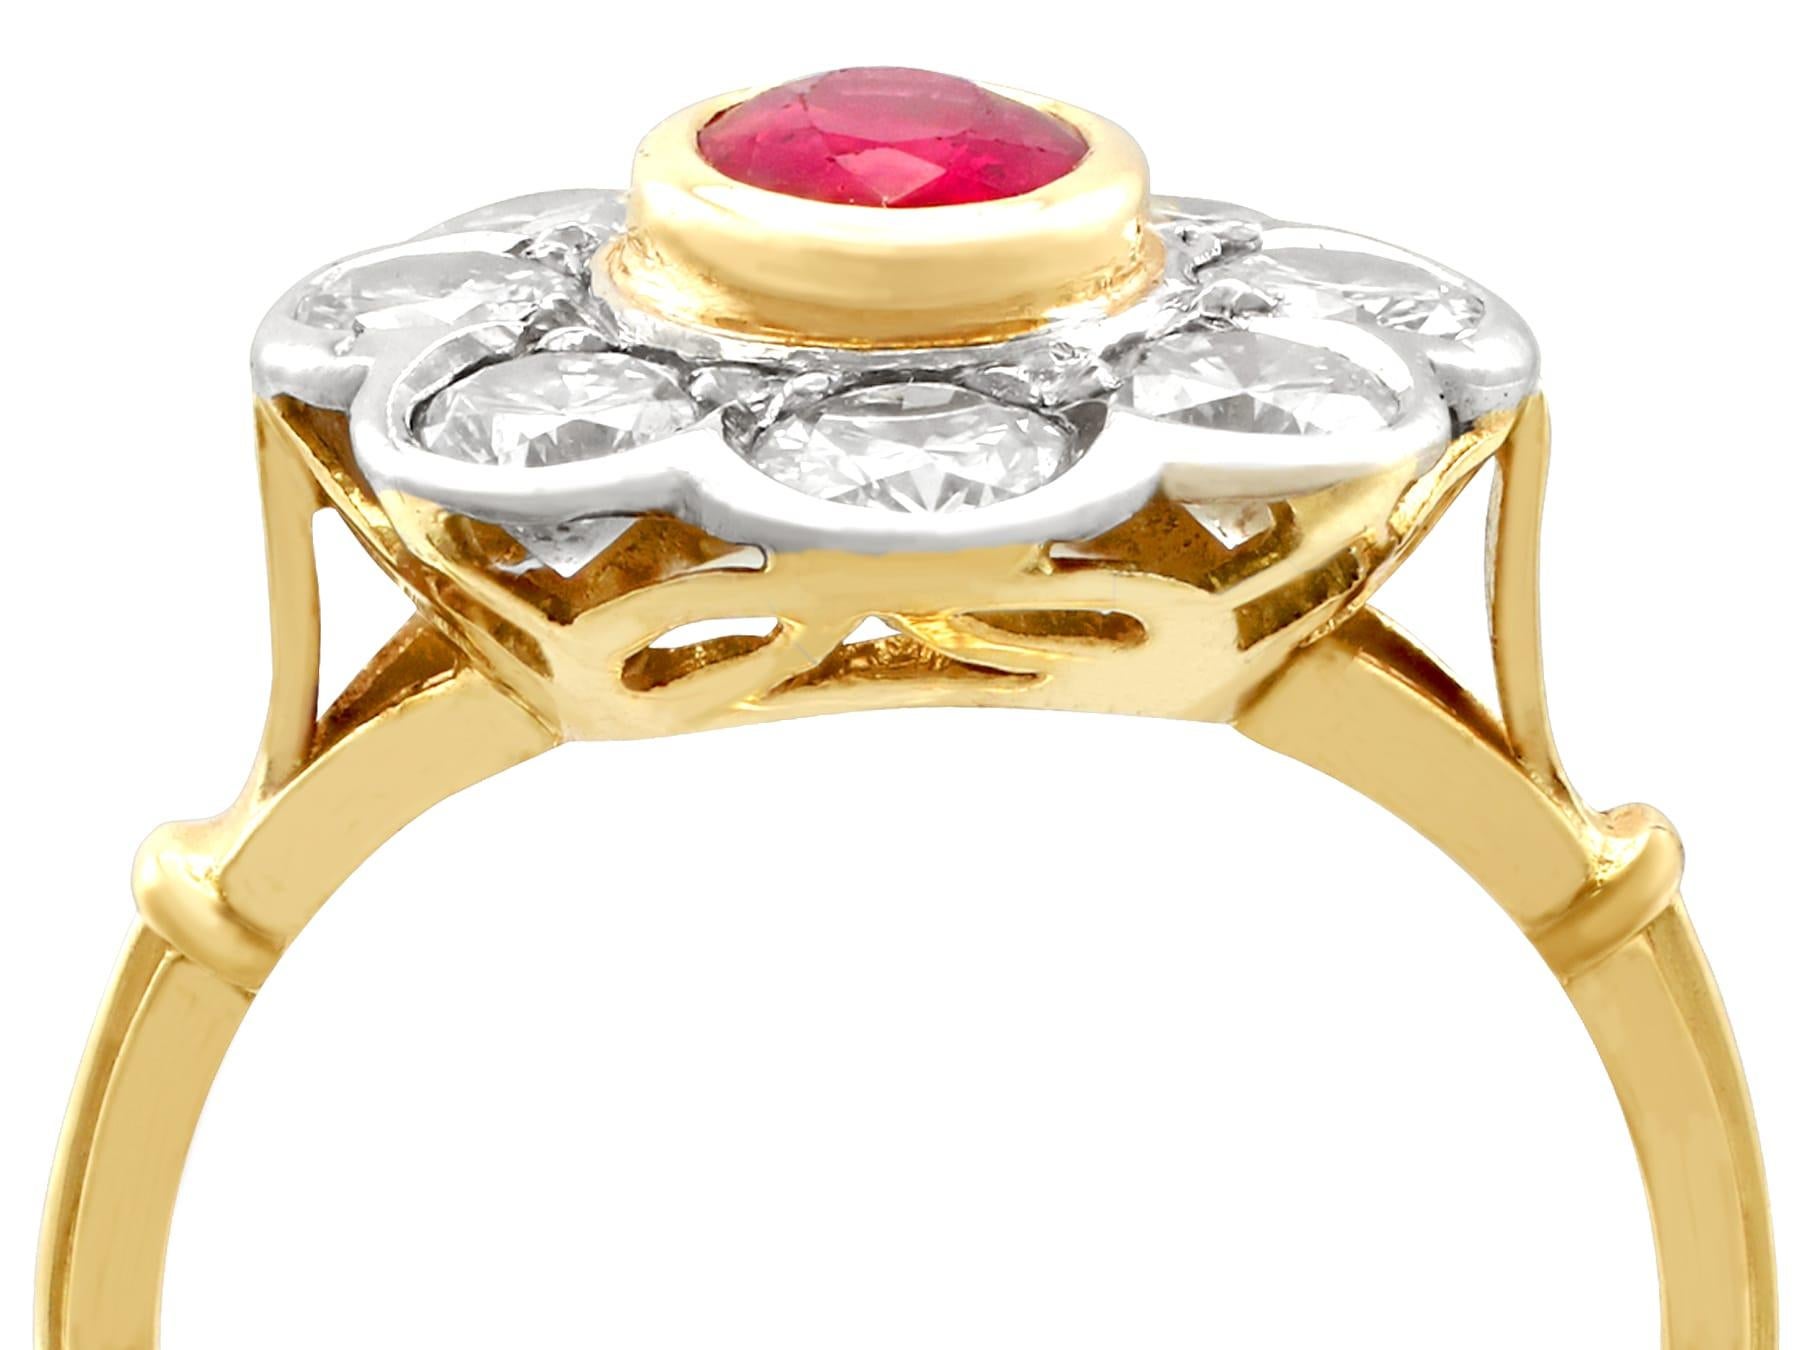 A fine and impressive vintage French 2.05 carat diamond, ruby coloured doublet (artificial) and 18k yellow gold, 18k white gold set cluster ring; part of our vintage jewelry and estate jewelry collections.

This fine French vintage cluster ring been